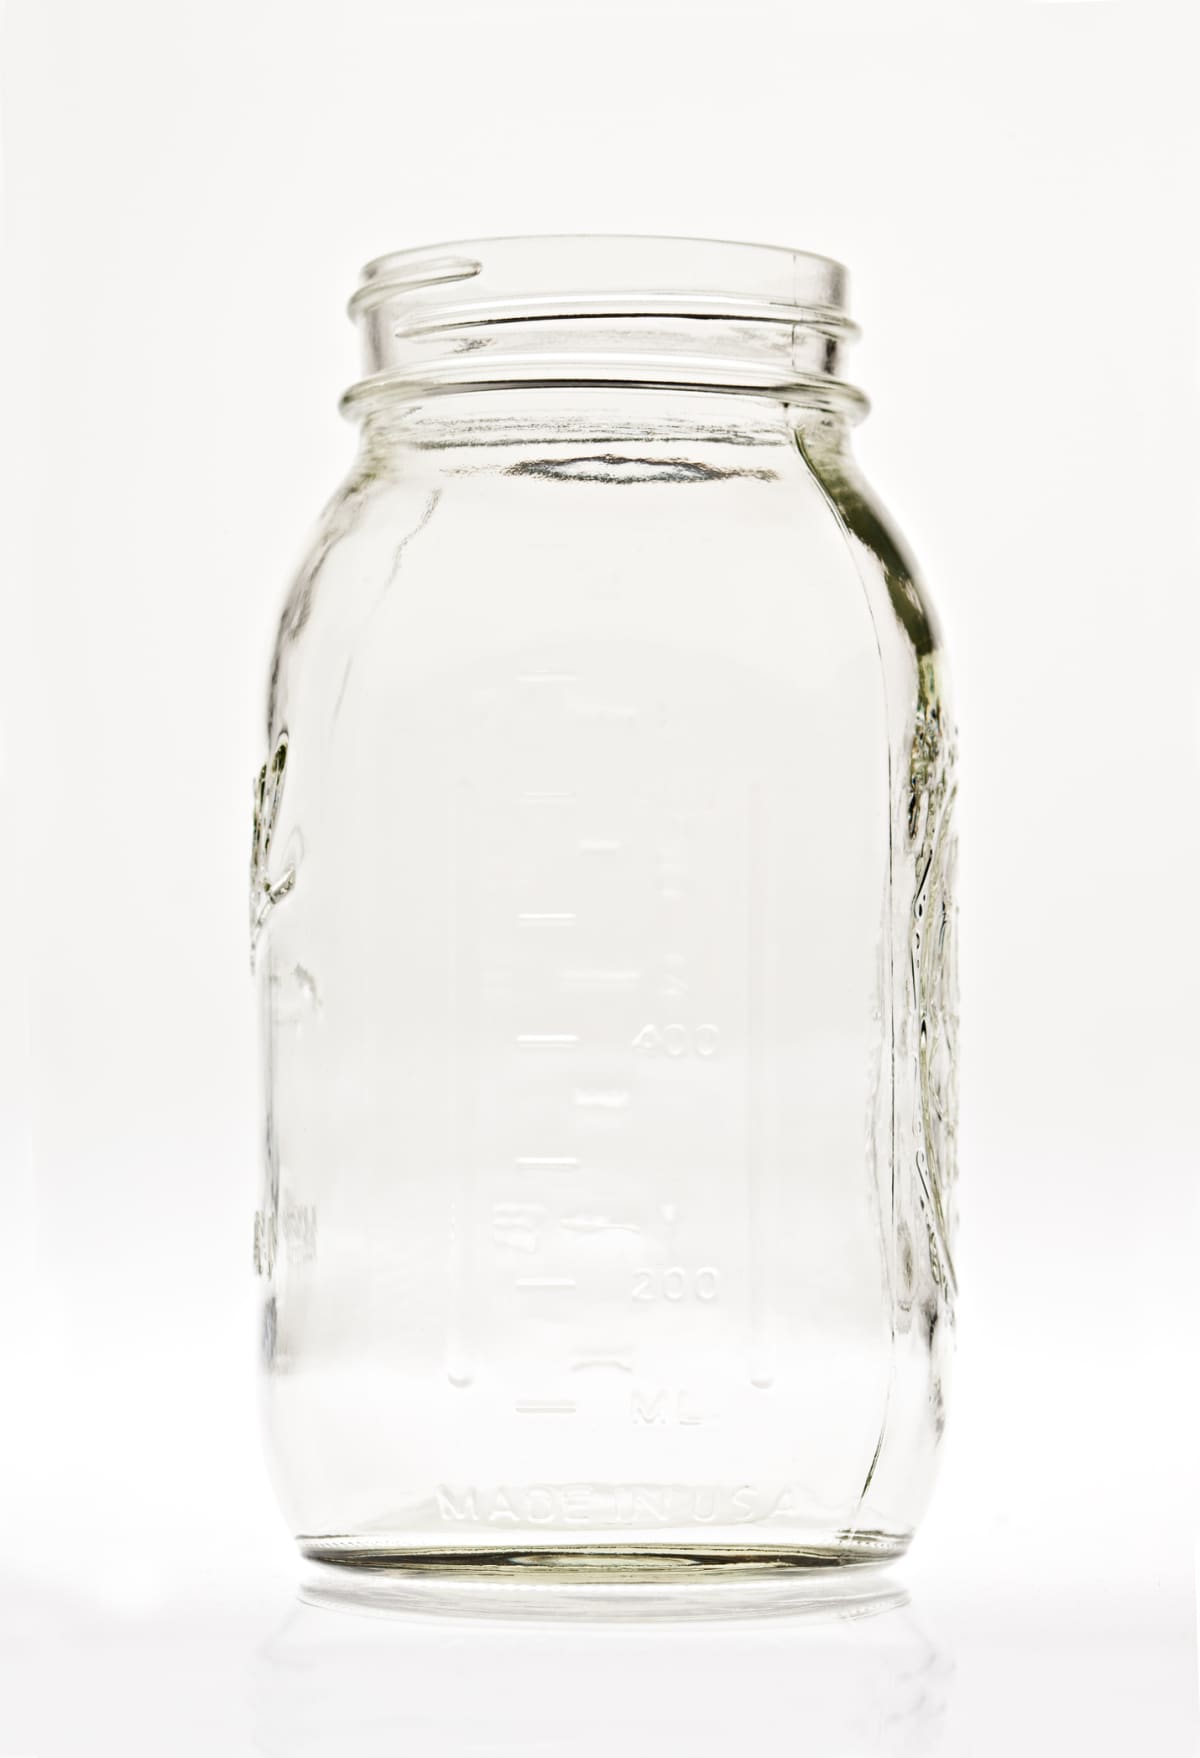 An extreme close up vertical photograph of an isolated in white empty clear glass canning jar.